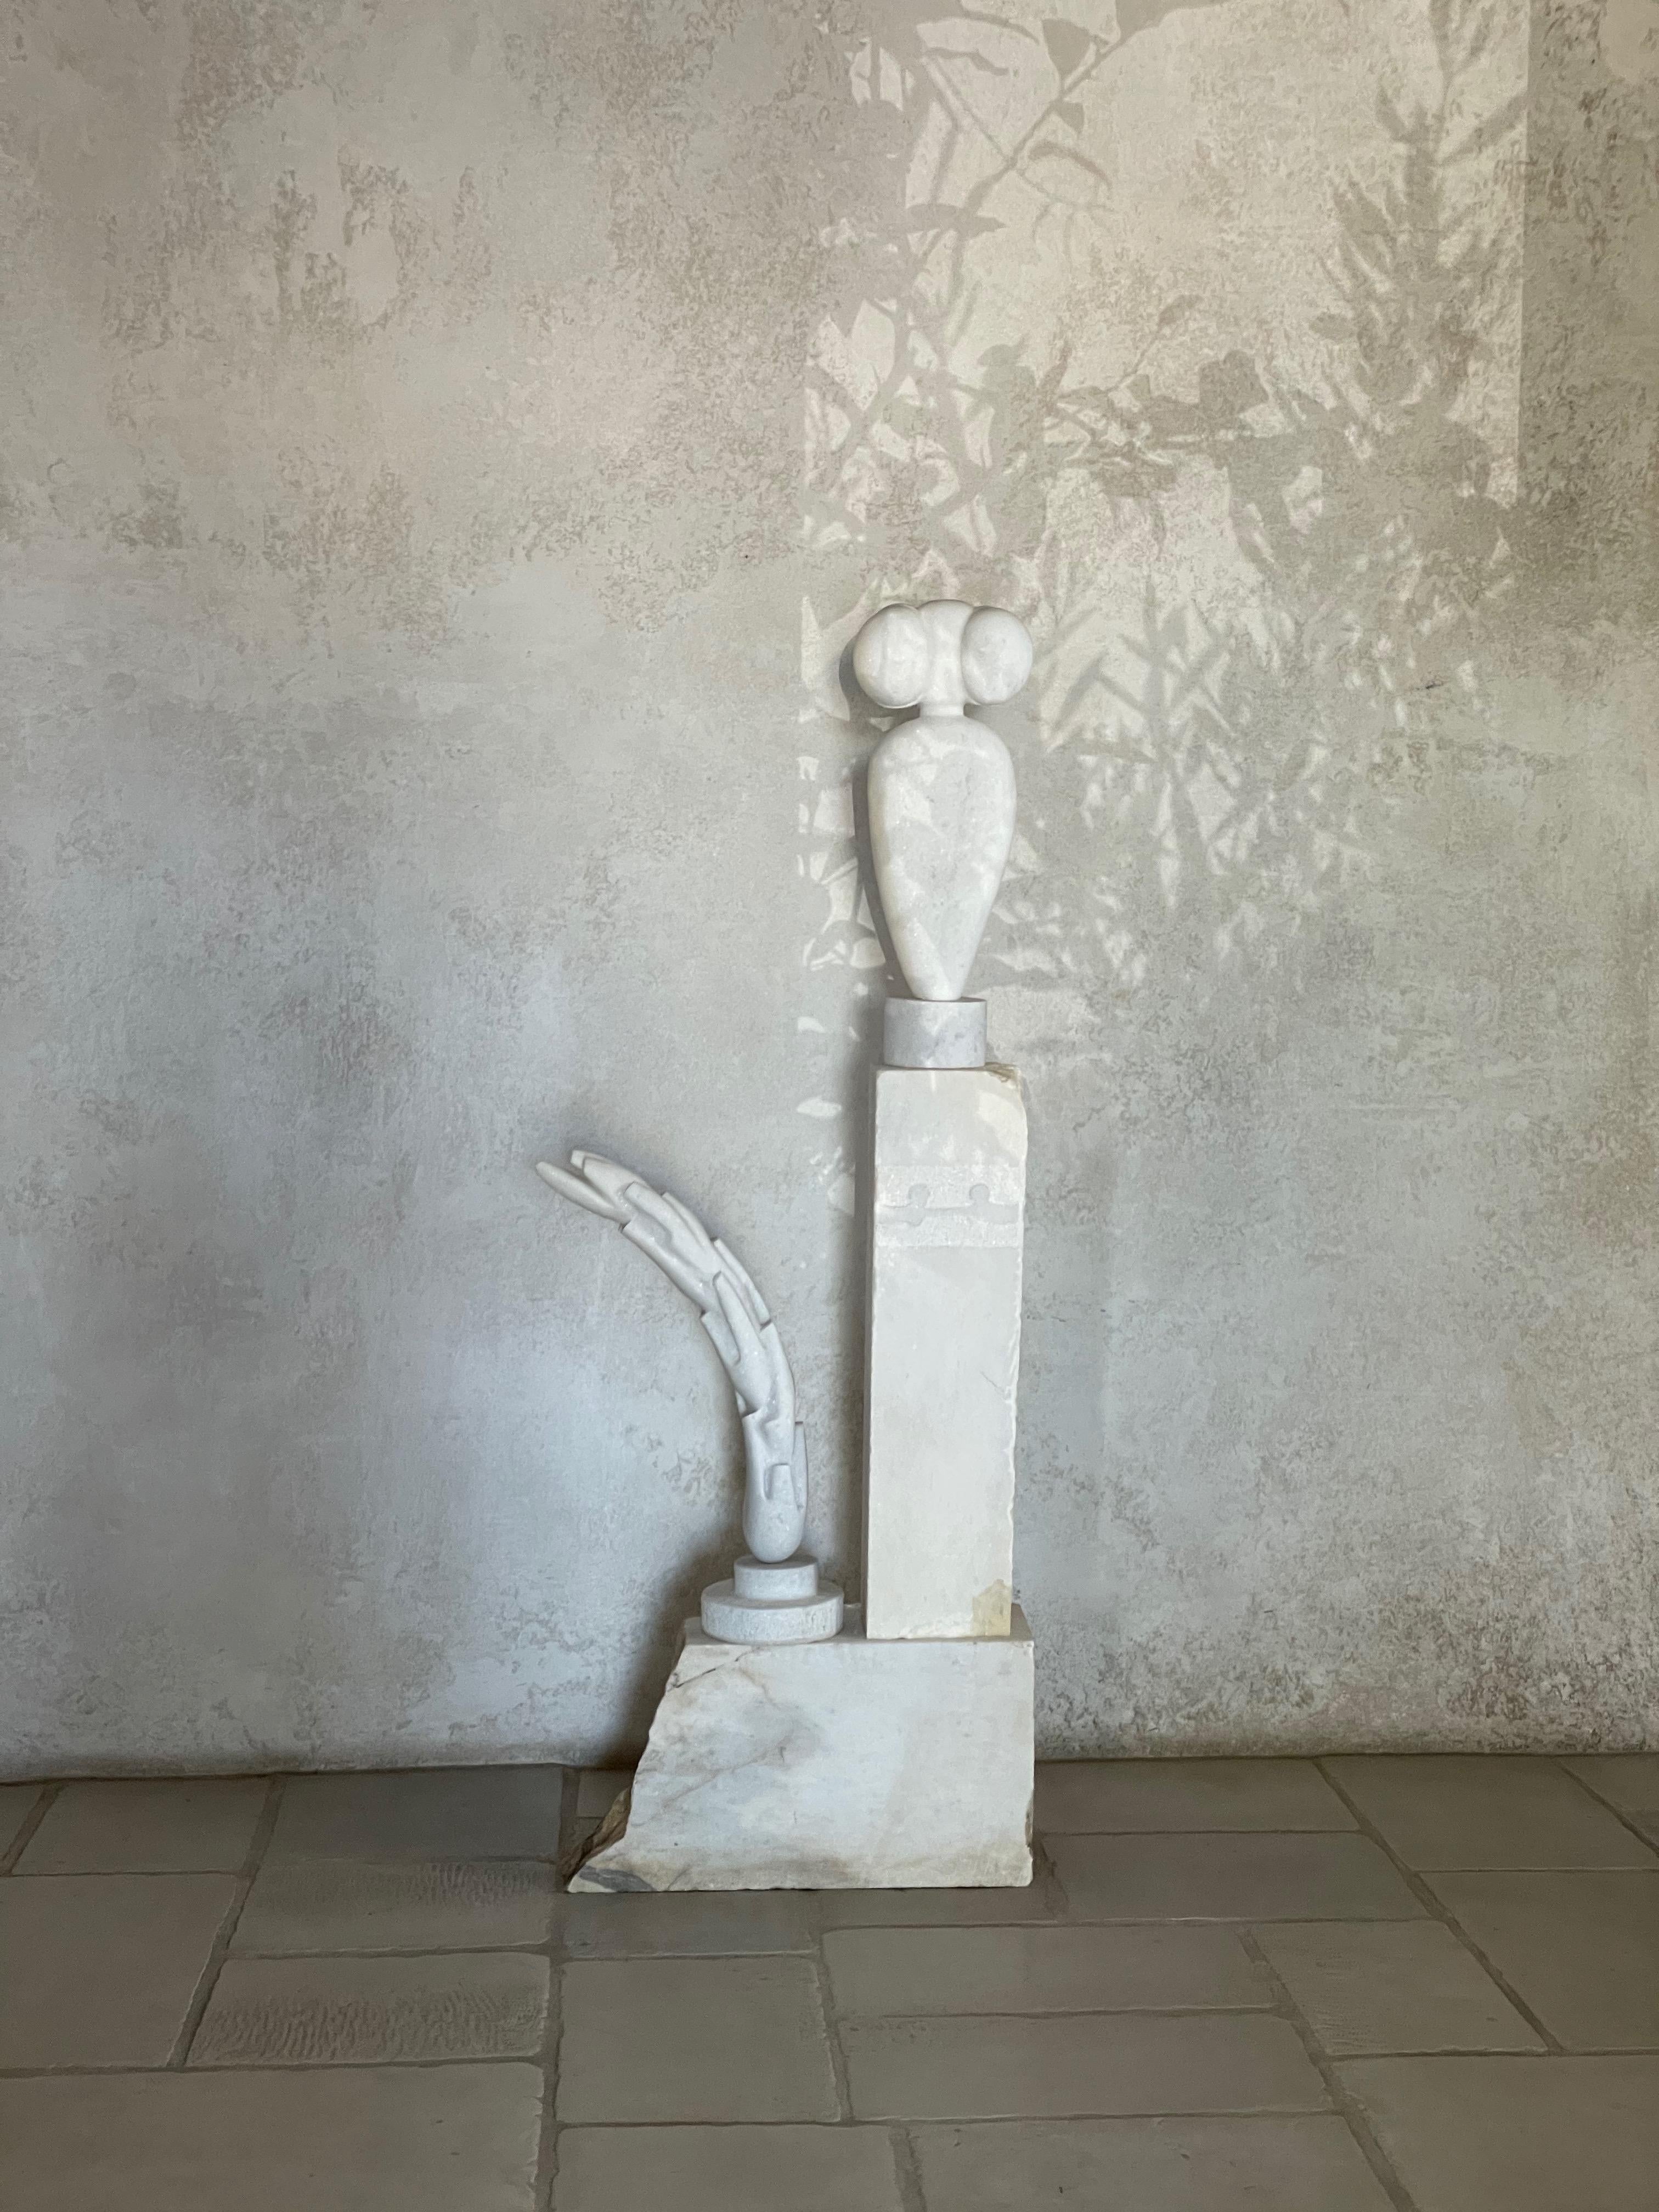 Sprout, Marble Sculpture by Tom von Kaenel
2018
Materials: Naxian Marble

All the artworks of Tom von Kaenel are unique, handcrafted by himself.
The stones all come from the surrounding marble quarries of the island. The Naxian marble is of